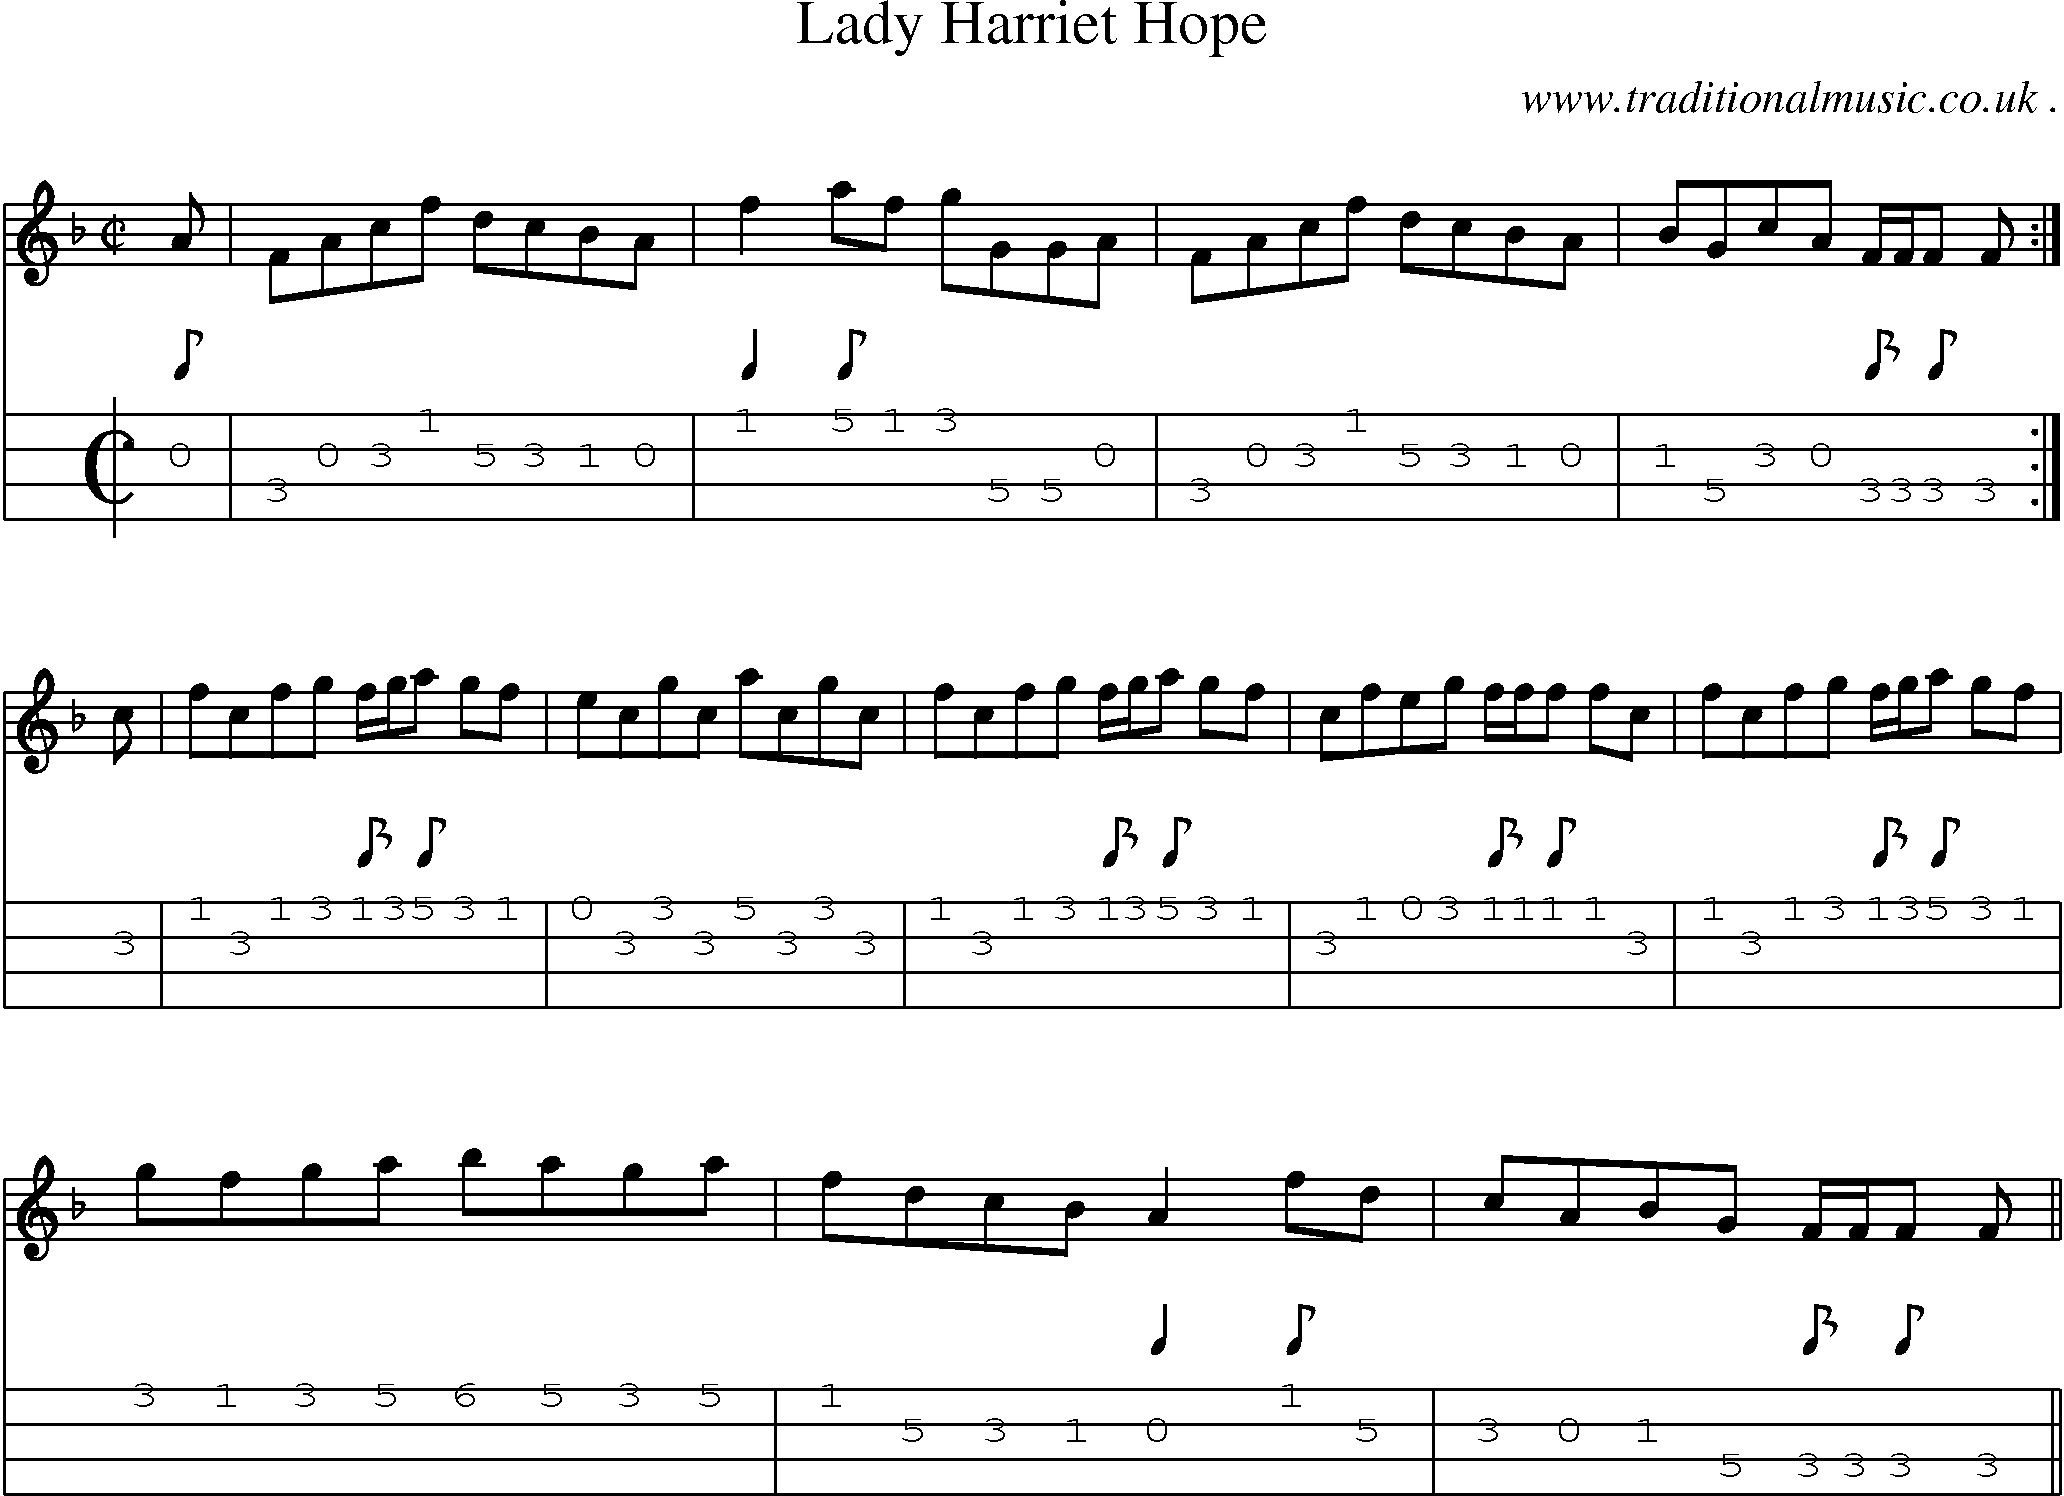 Sheet-music  score, Chords and Mandolin Tabs for Lady Harriet Hope